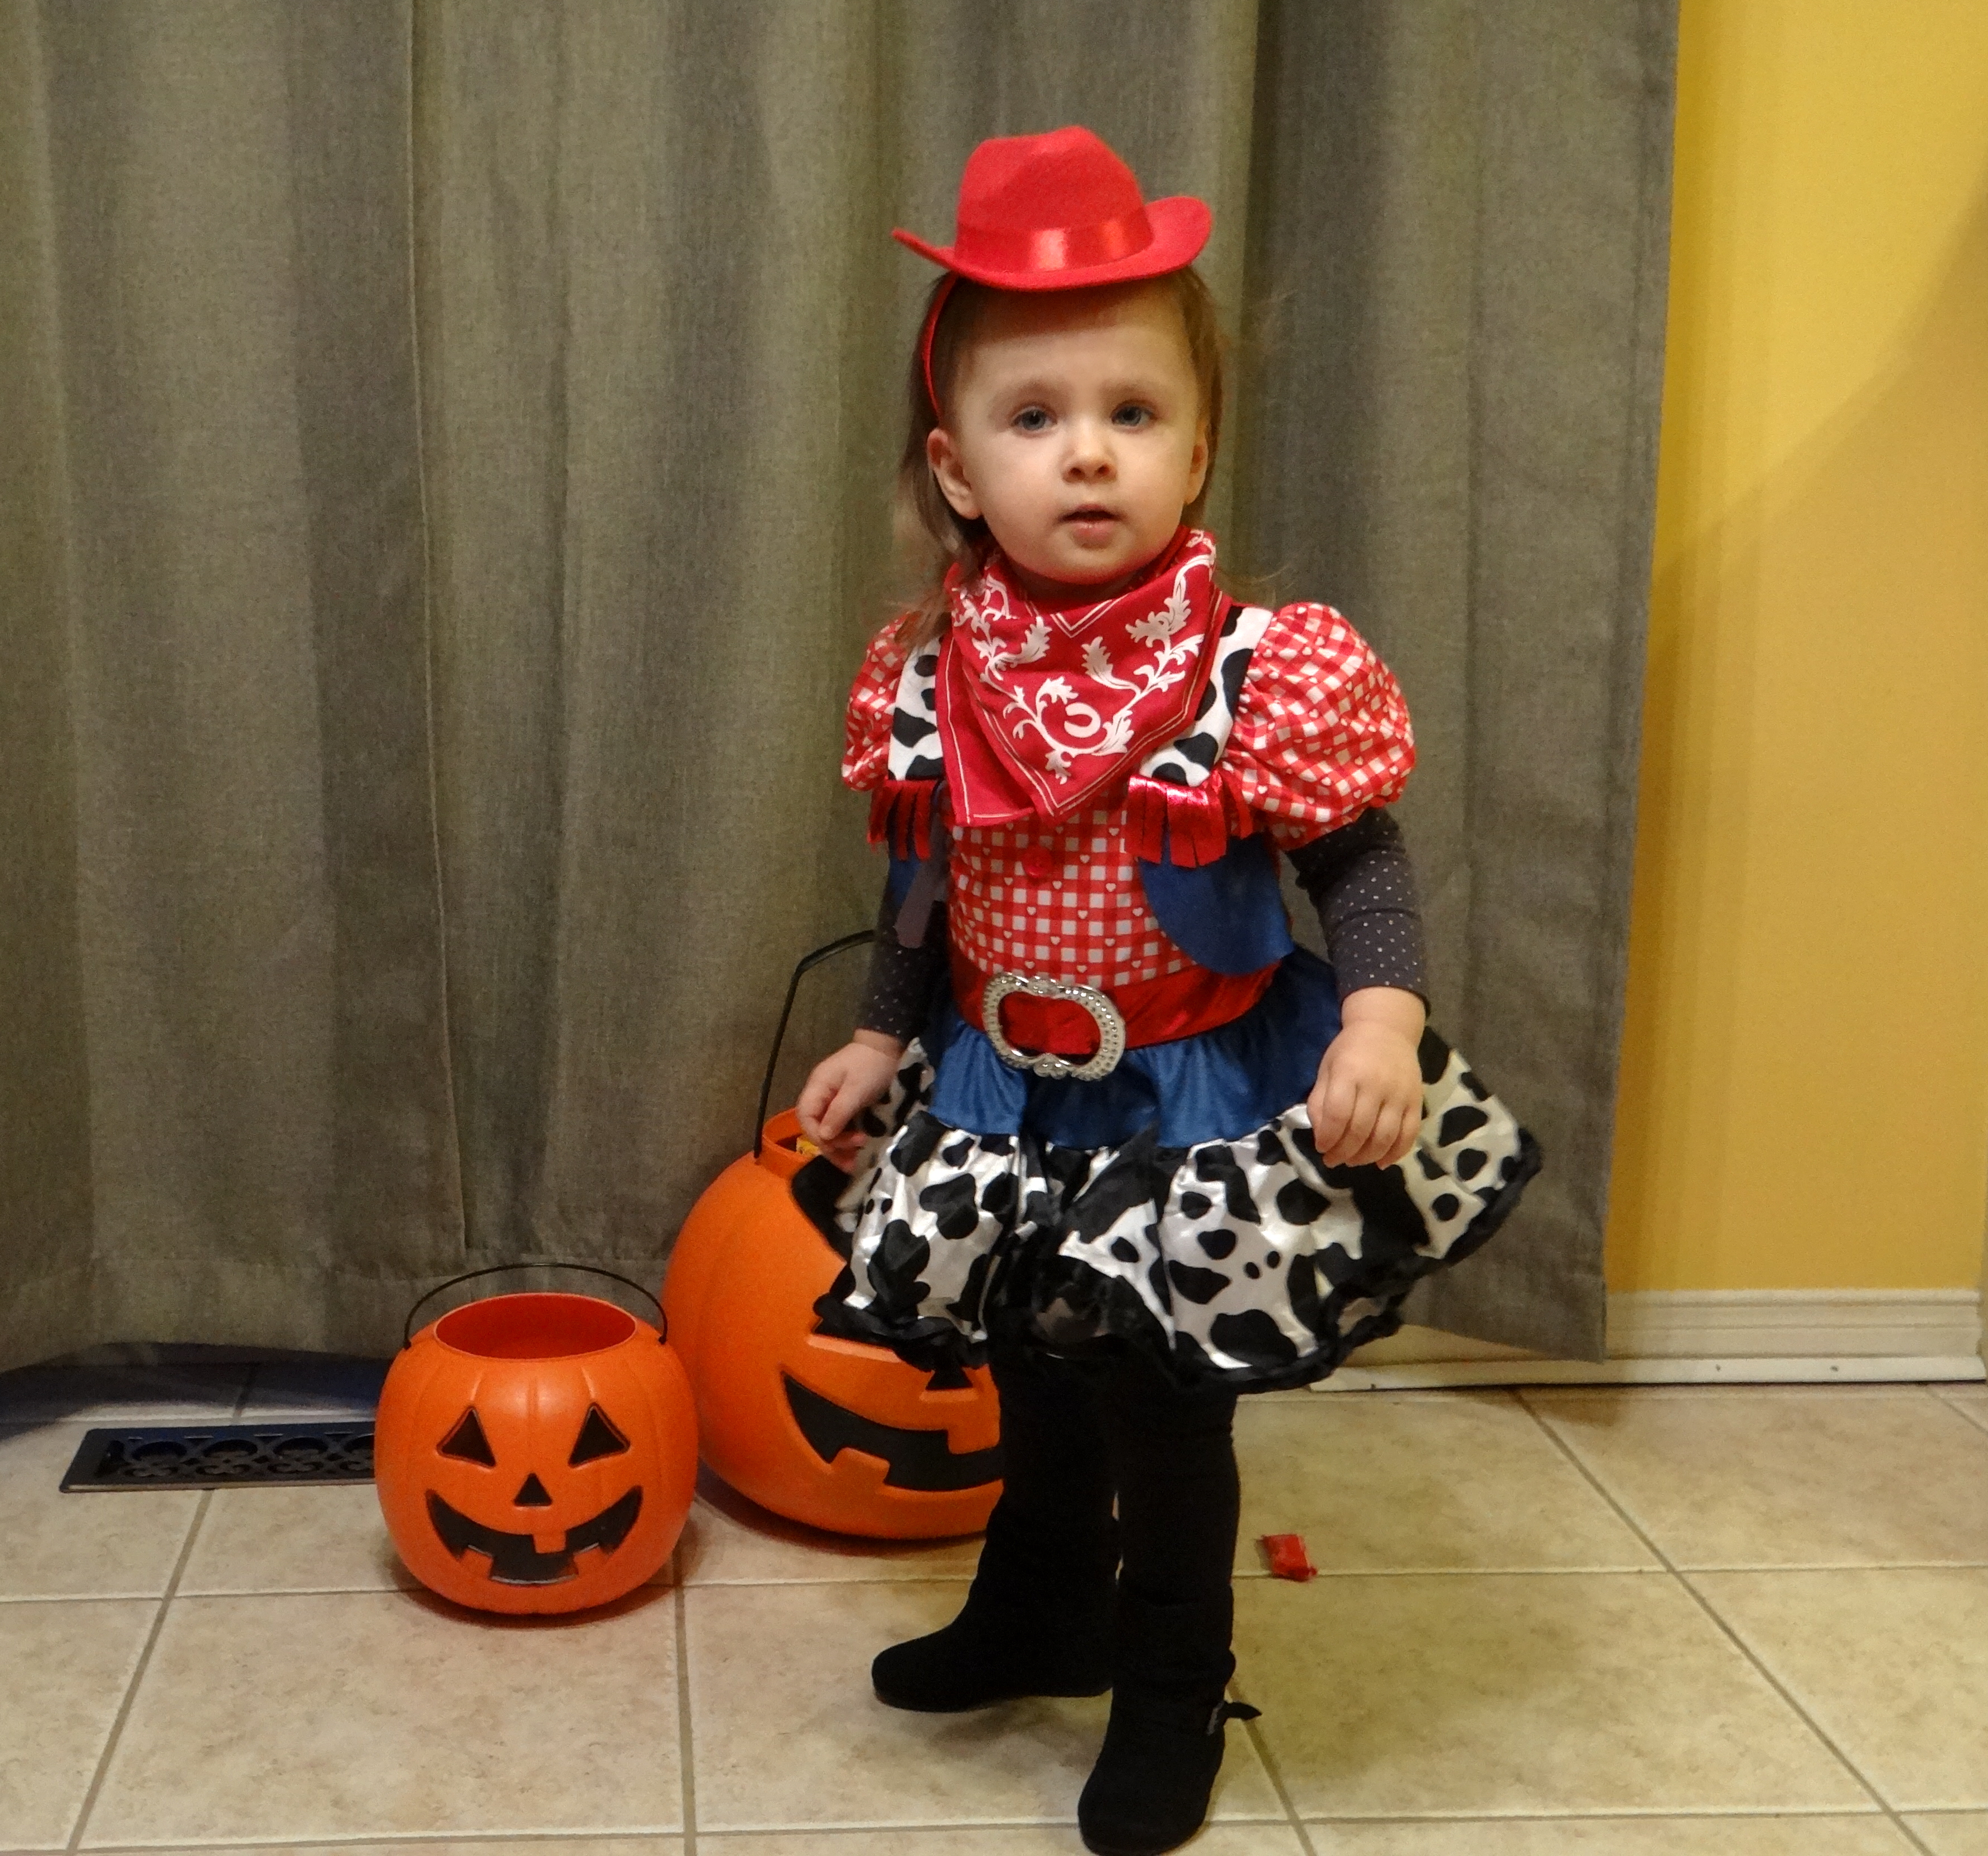 Peachy dressed up as a cowgirl and ready for Halloween